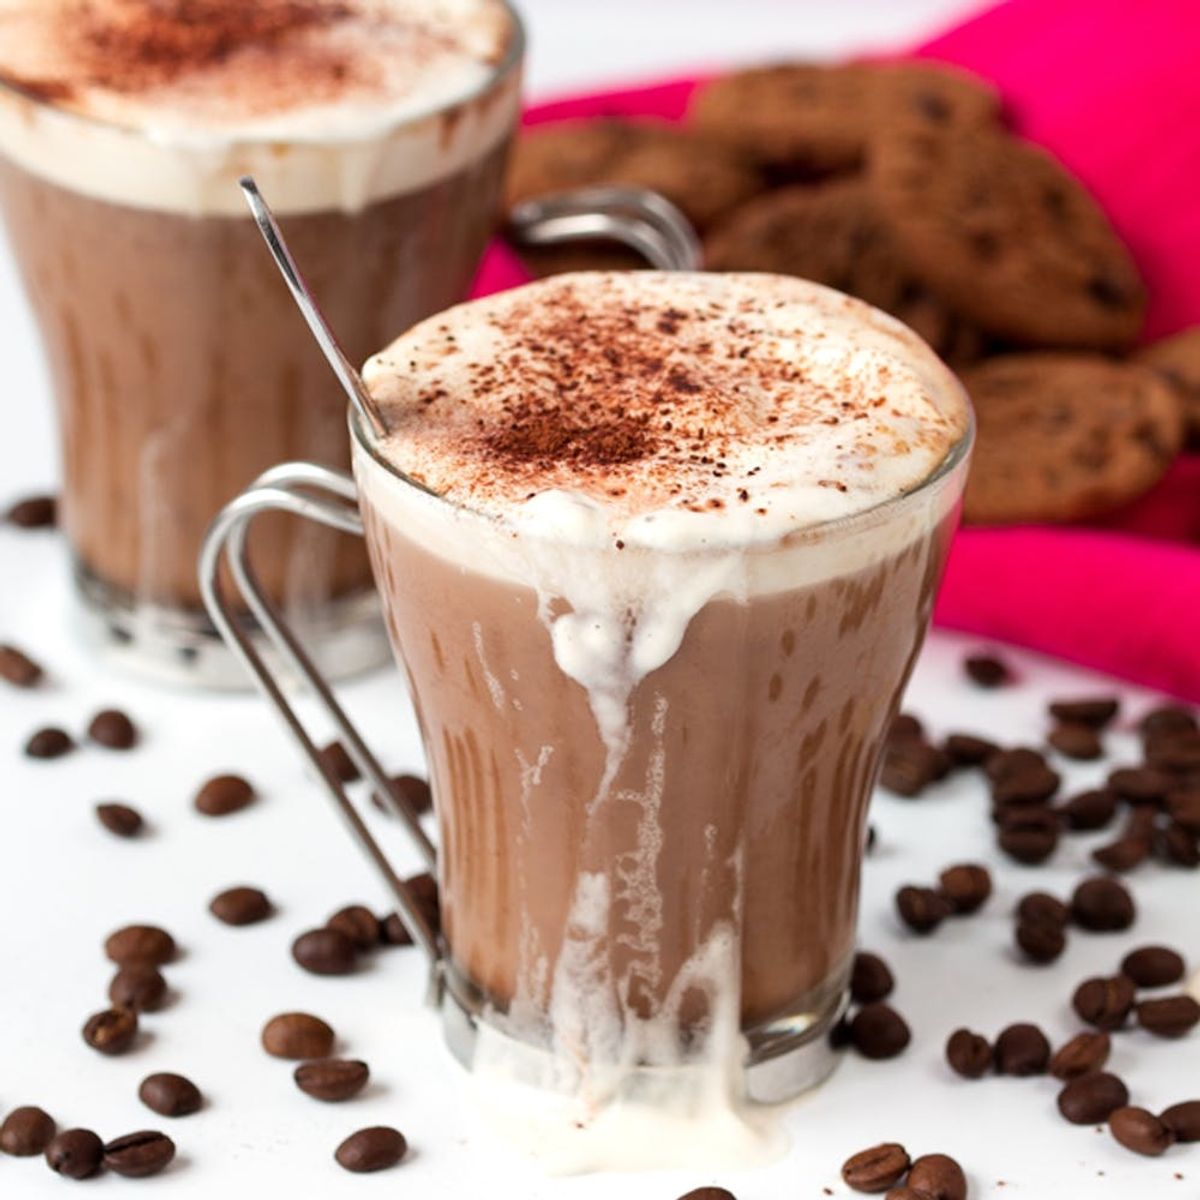 This Easy-to-Make Amaretto Mocha Recipe May Ruin Regular Coffee for You Forever